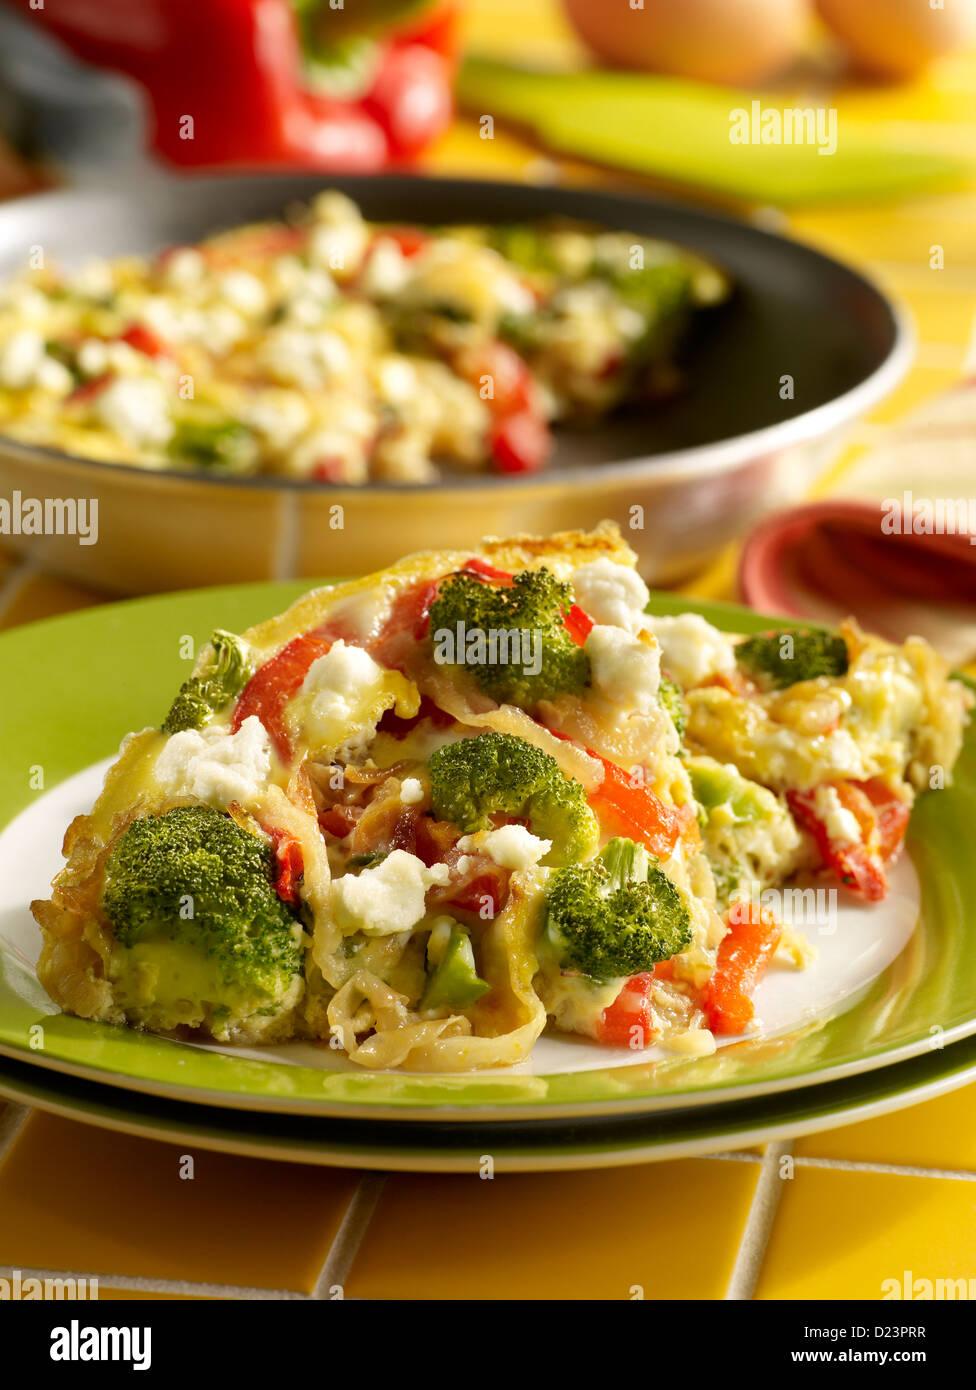 Caramelized onion, red bell pepper, broccoli and cheese frittata in a kitchen setting Stock Photo